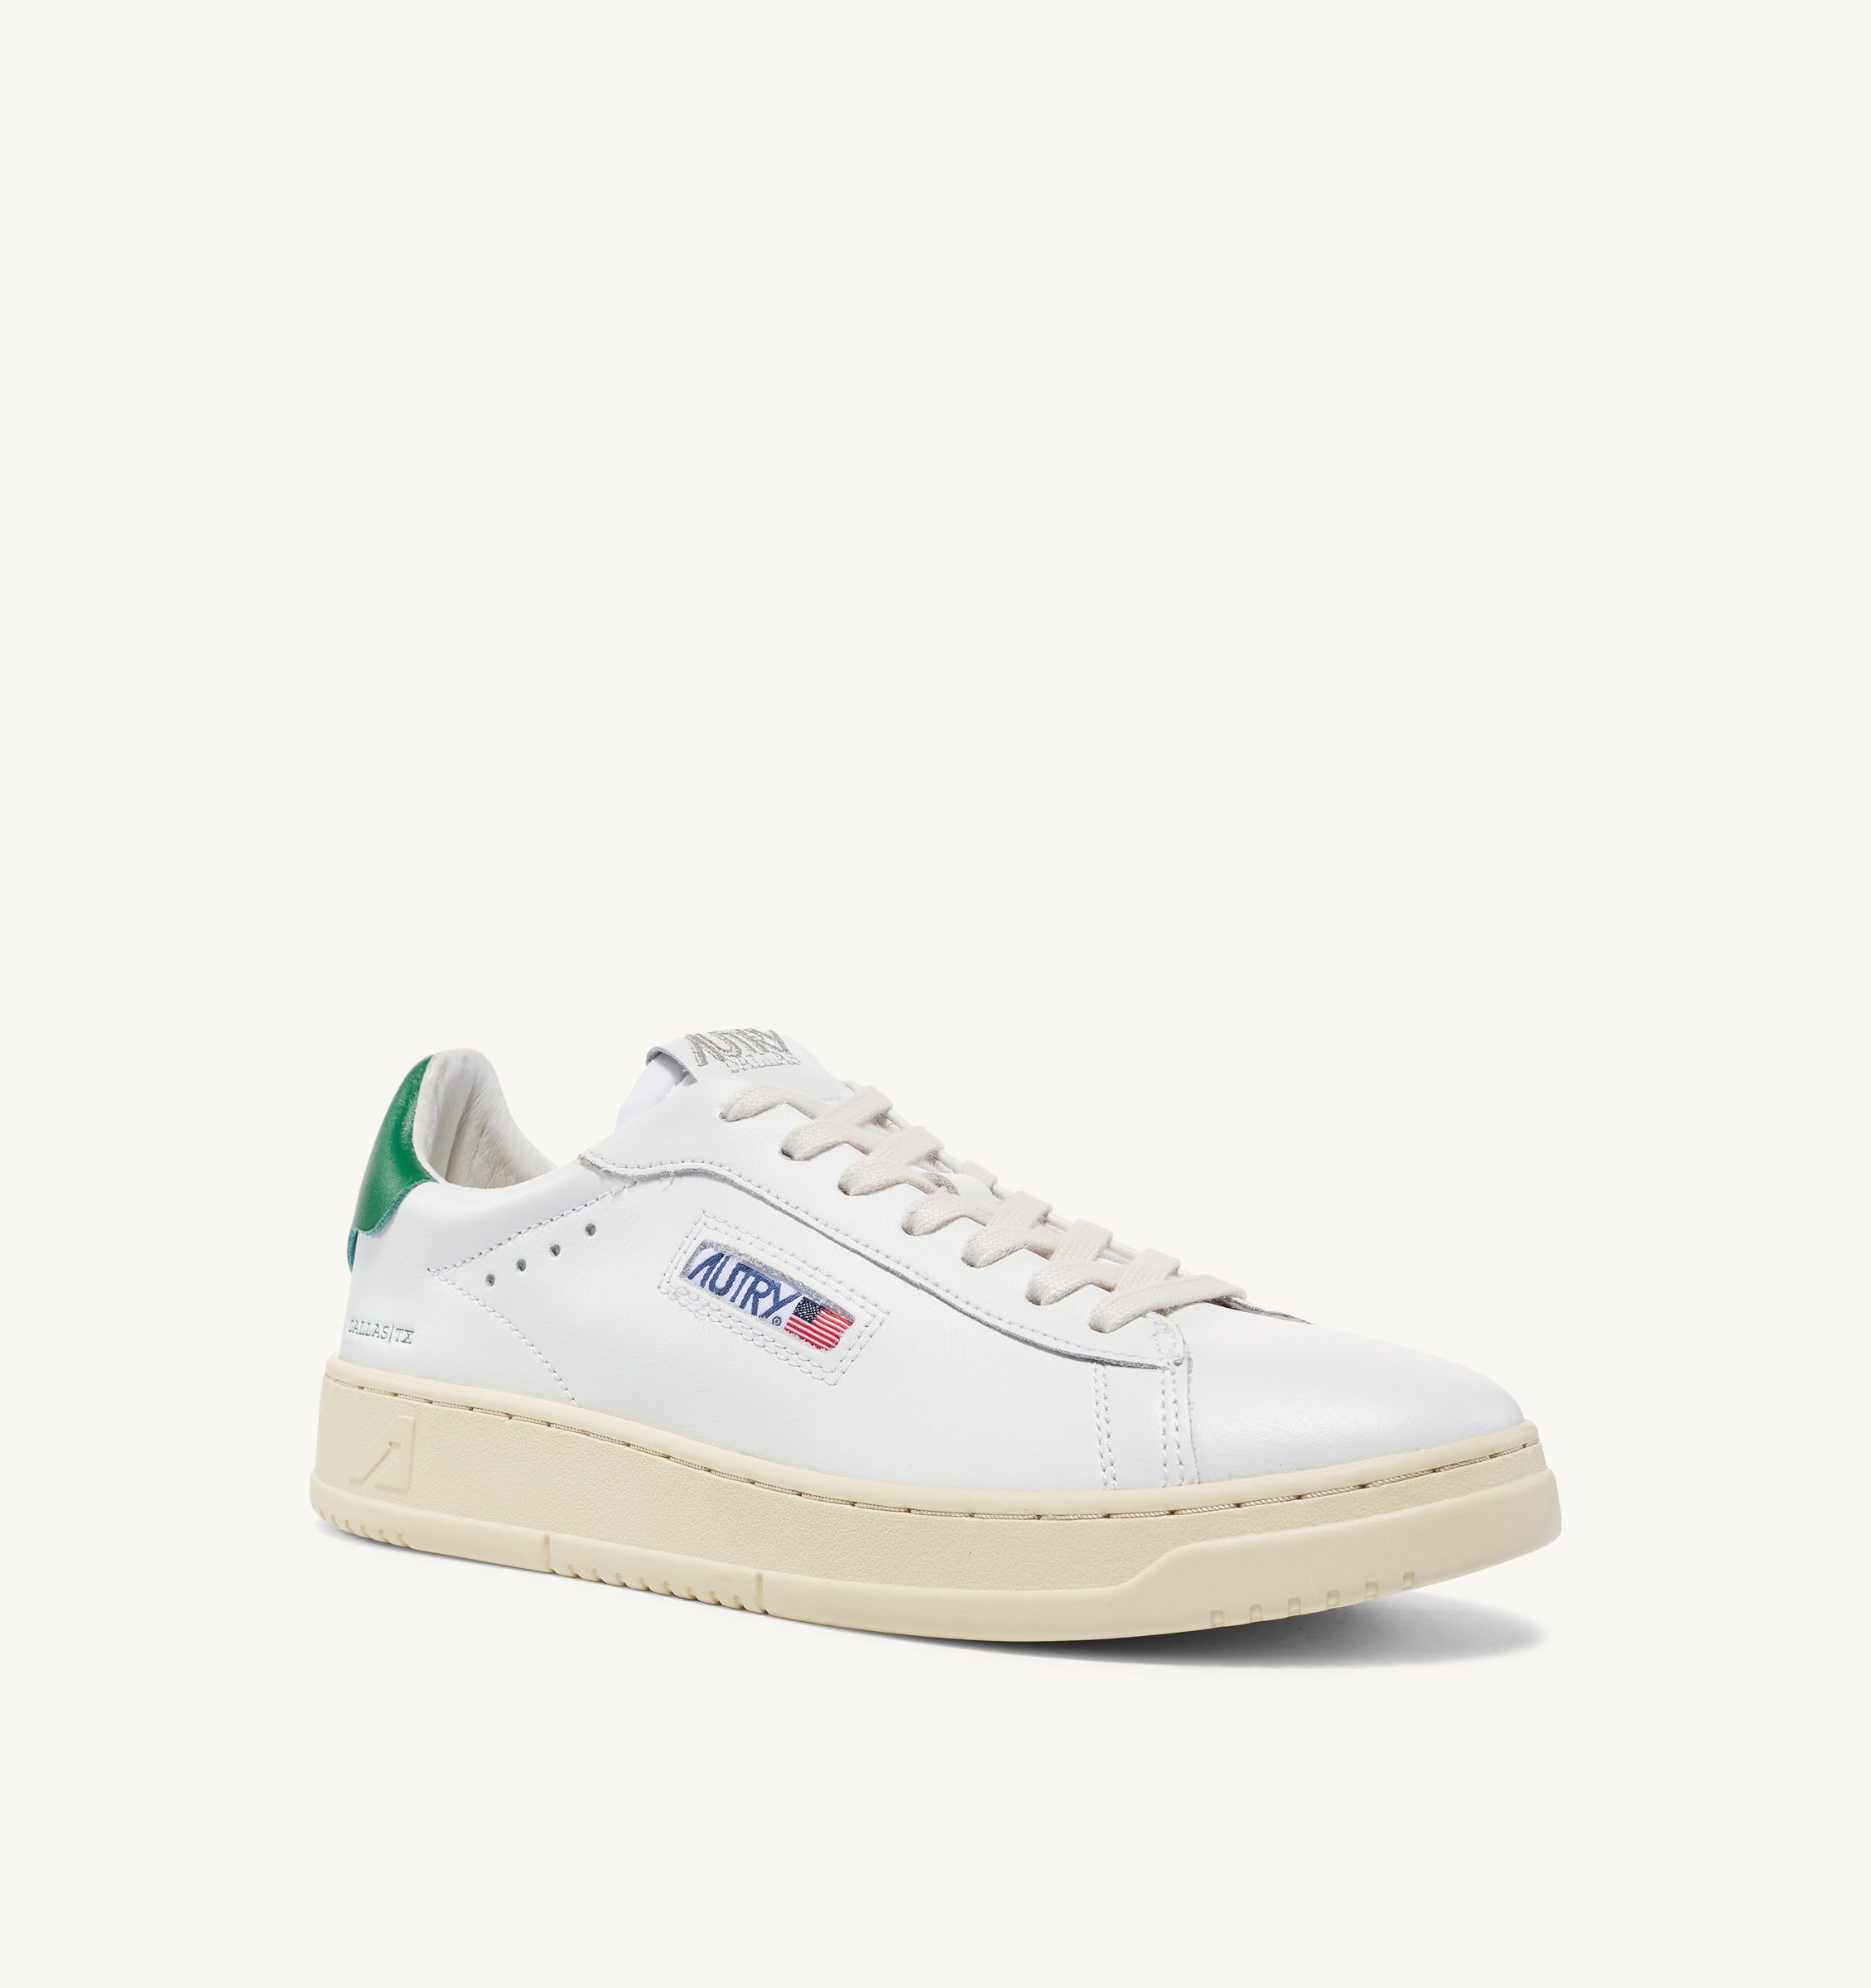 ADLM-NW02 - DALLAS LOW SNEAKERS IN LEATHER COLOR WHITE AND GREEN